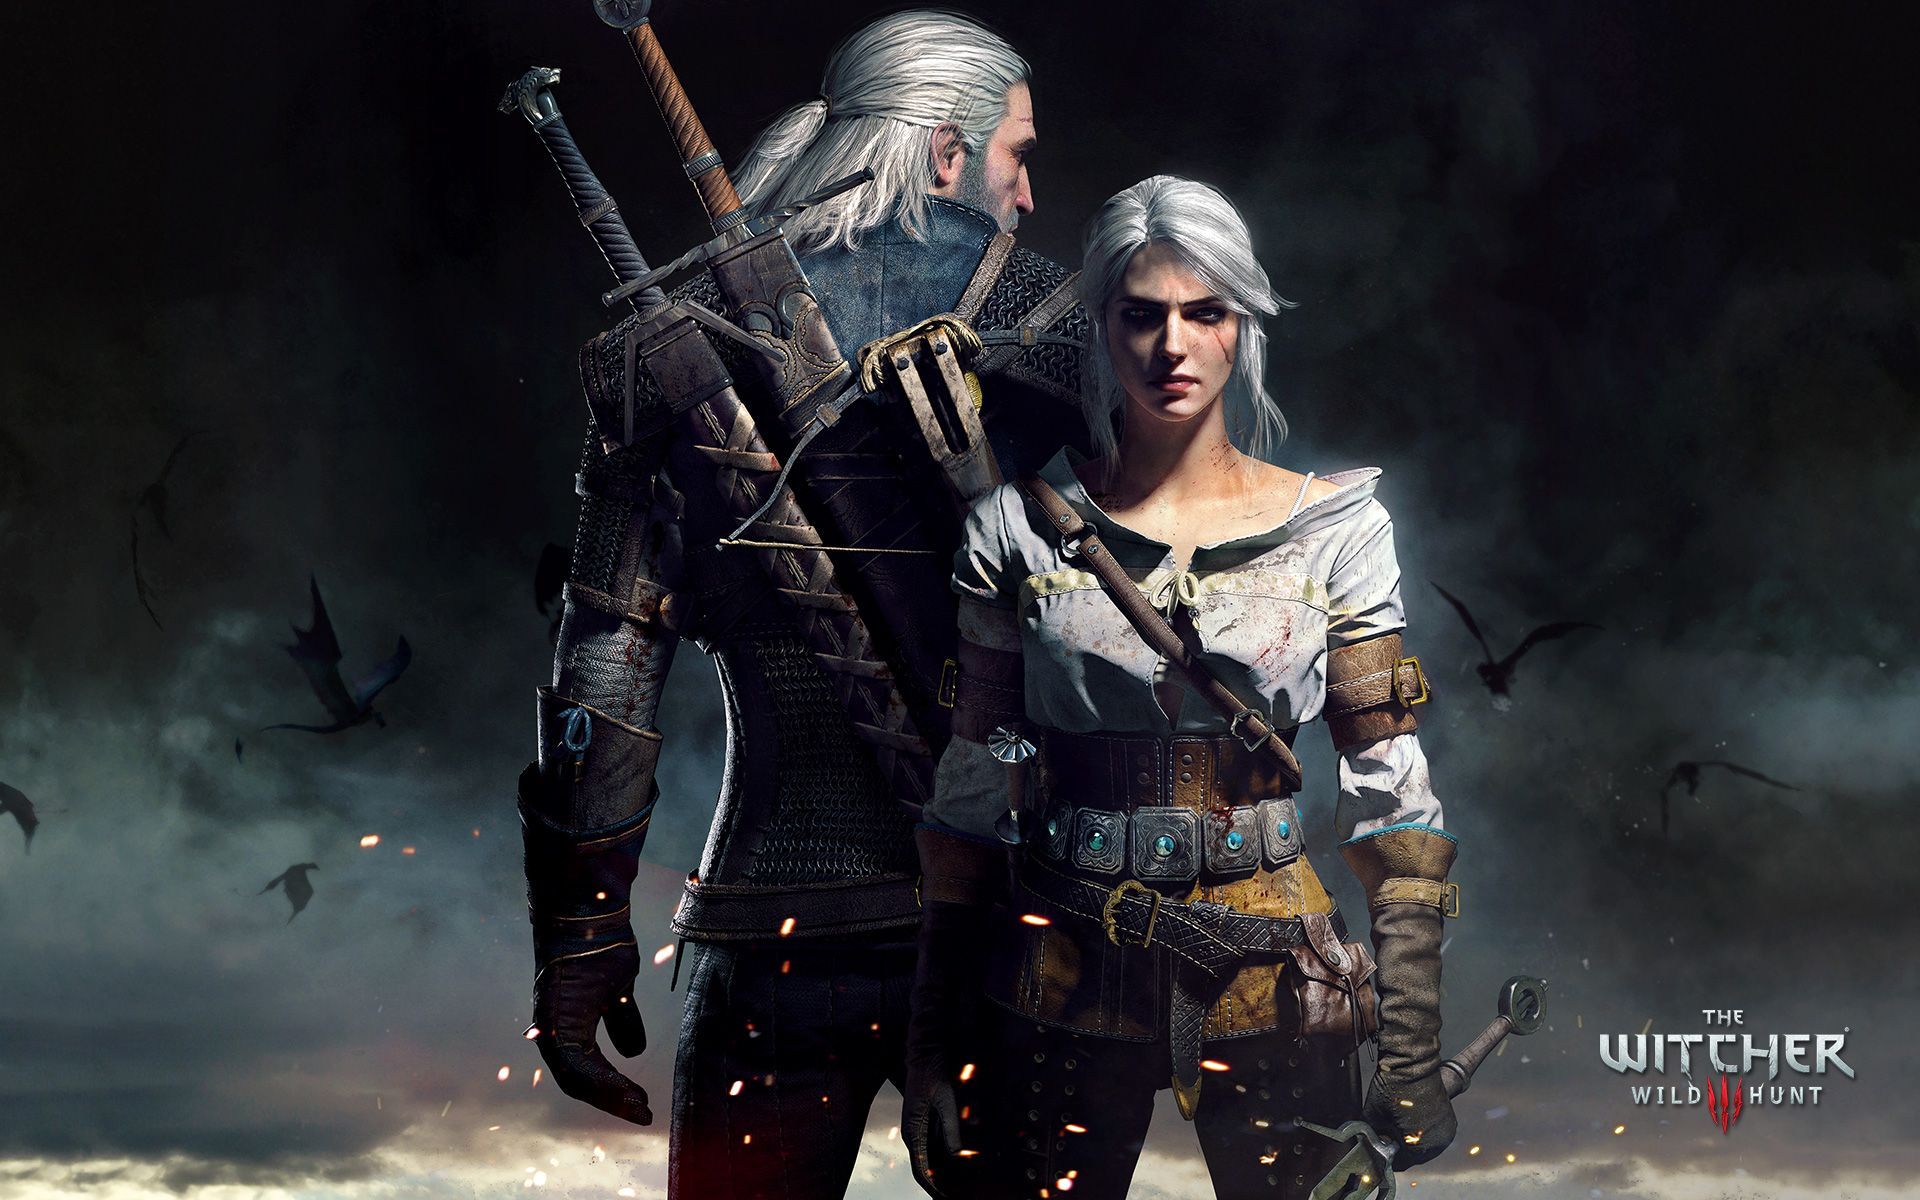 The Witcher 3 Wild Hunt - Official Website